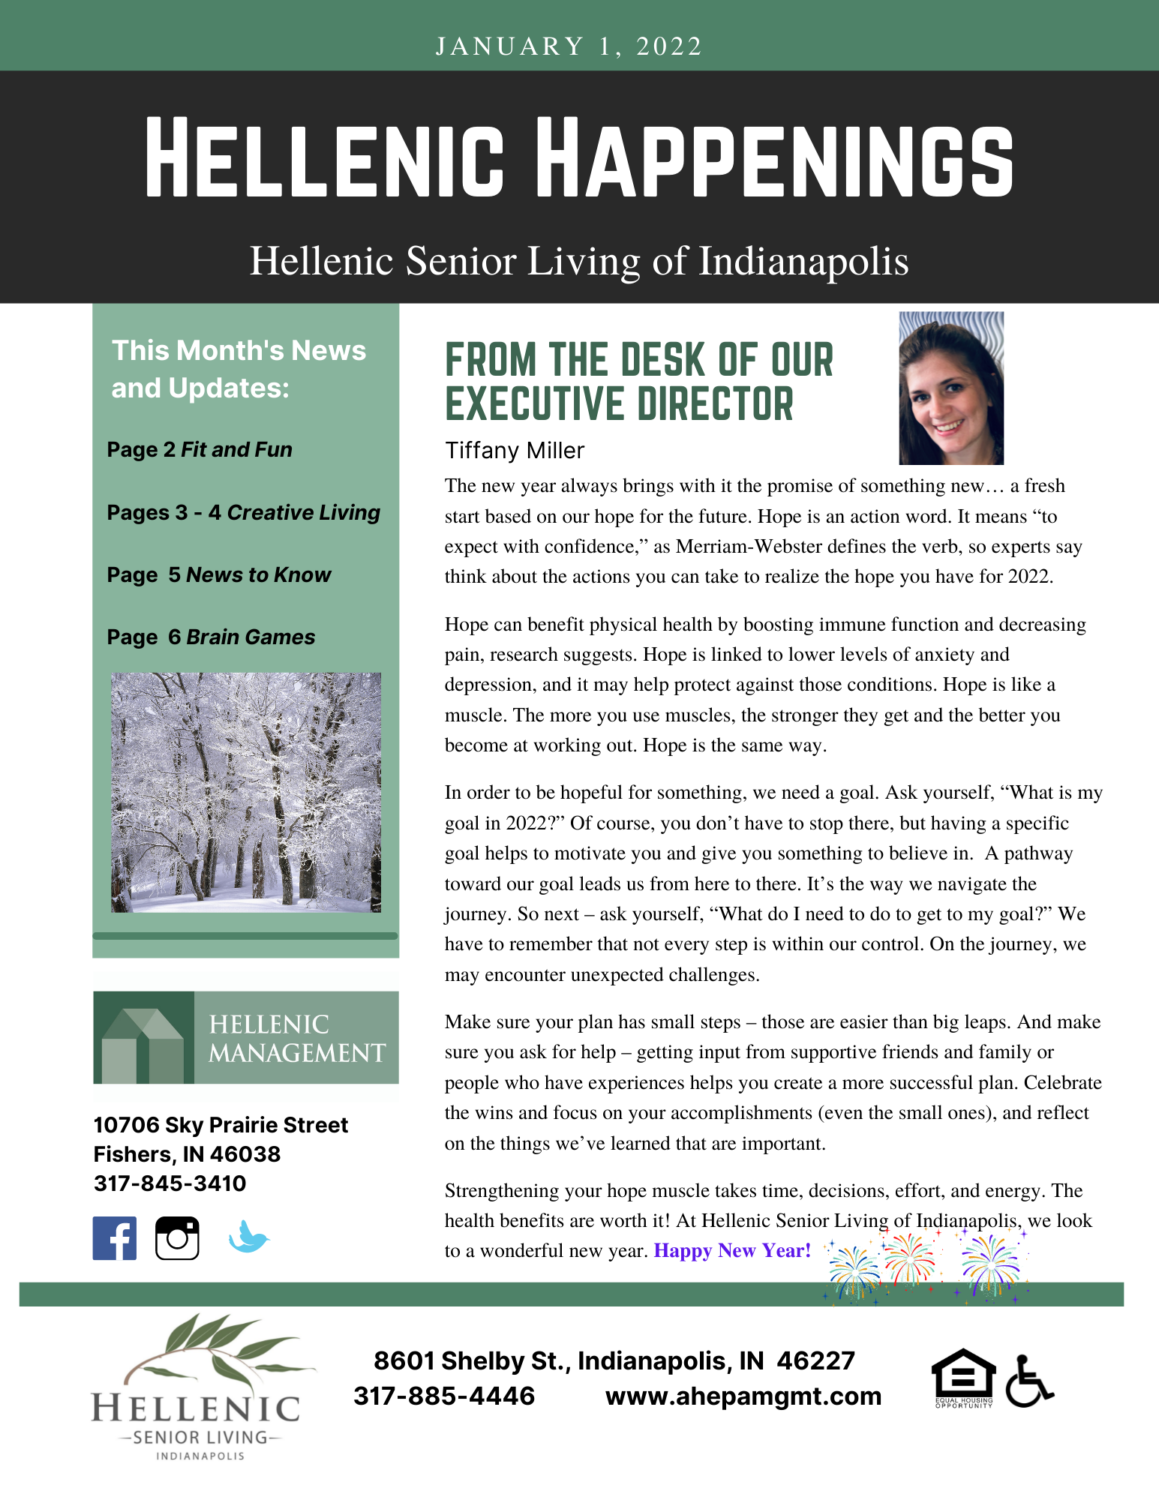 Hellenic Happenings January 2022 Newsletter, page 1